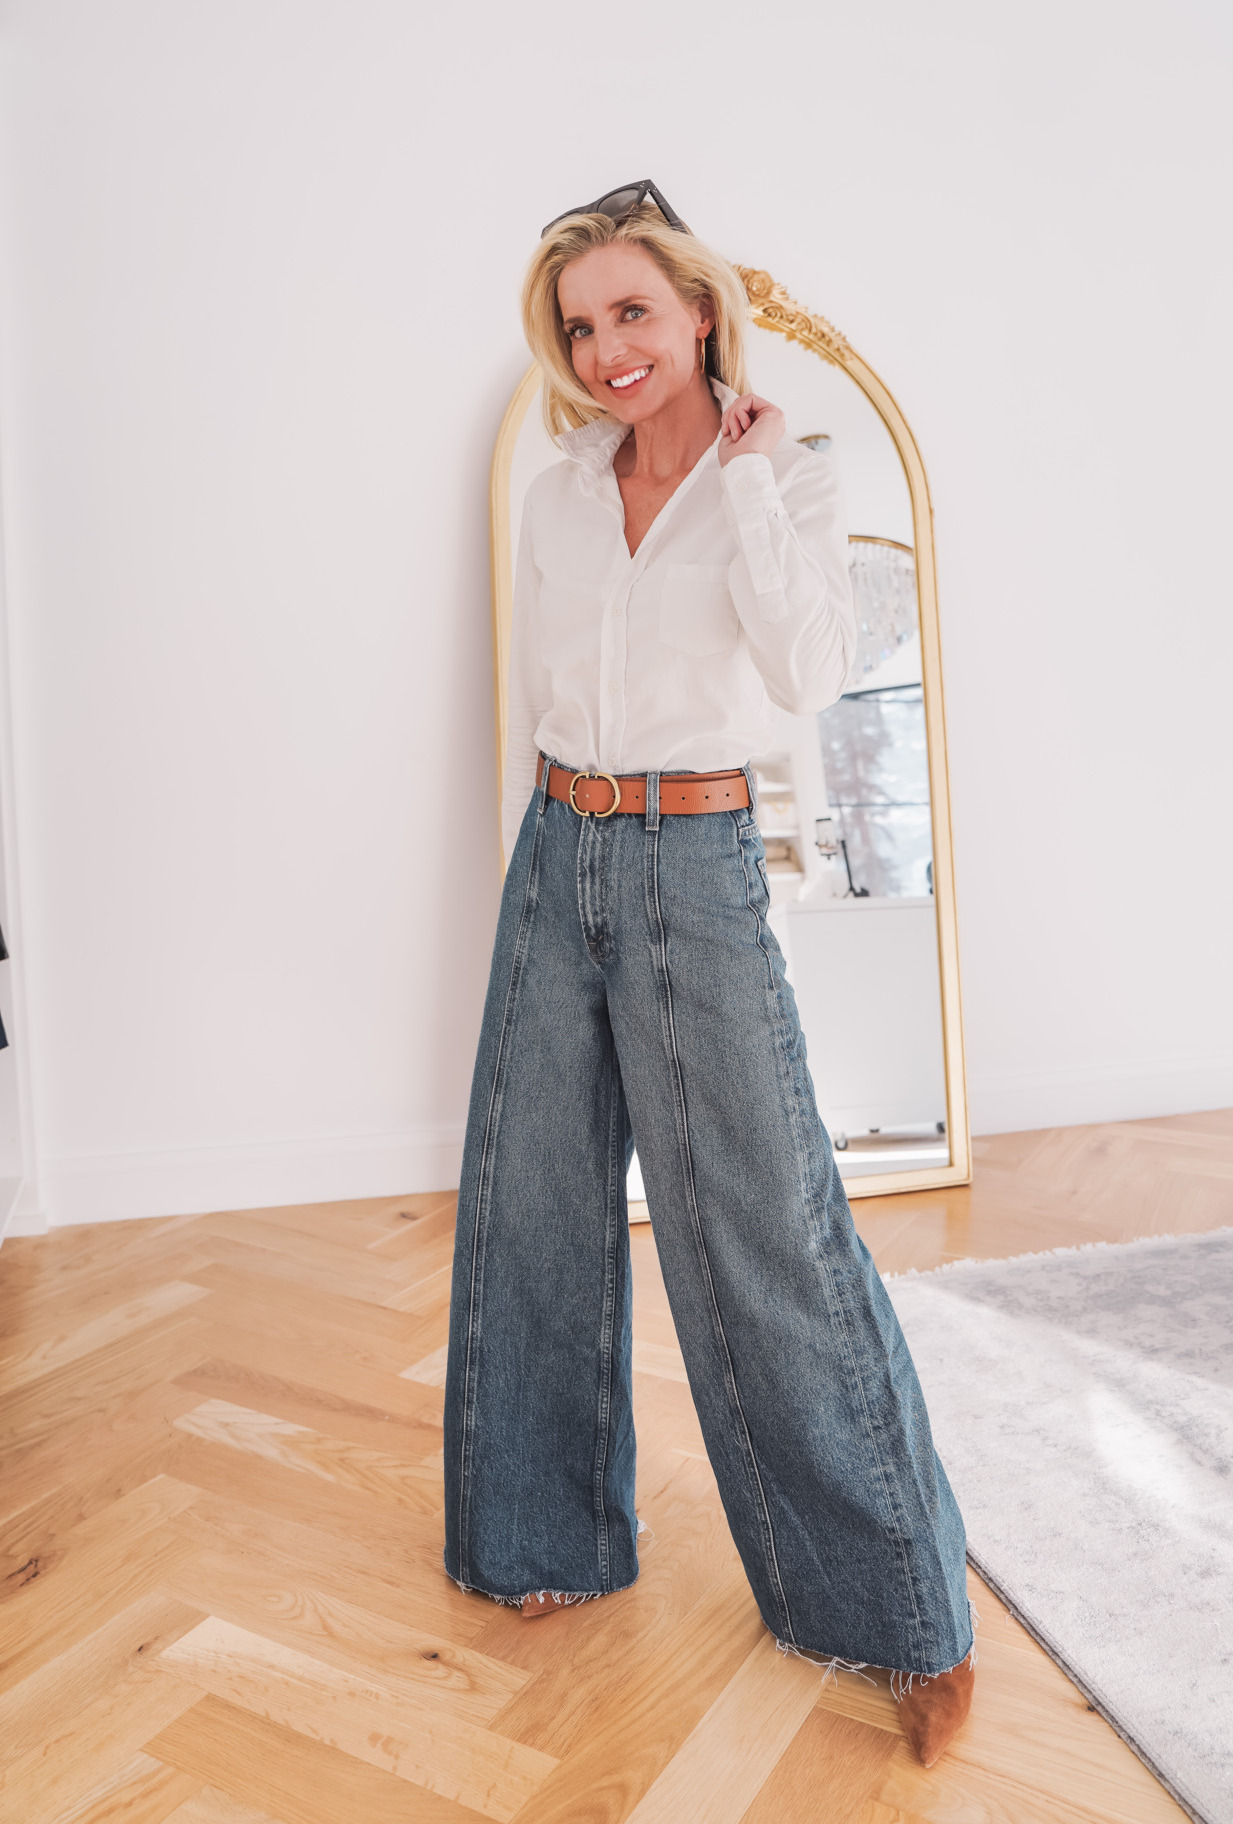 How To Look Taller in Baggy Jeans How To Wear Baggy Jeans Mother Launch Line Sneak Wide Leg Jeans with Frank Eileen Button Down Shirt Erin Busbee Busbee Style Fashion Over 404 e1708638412619